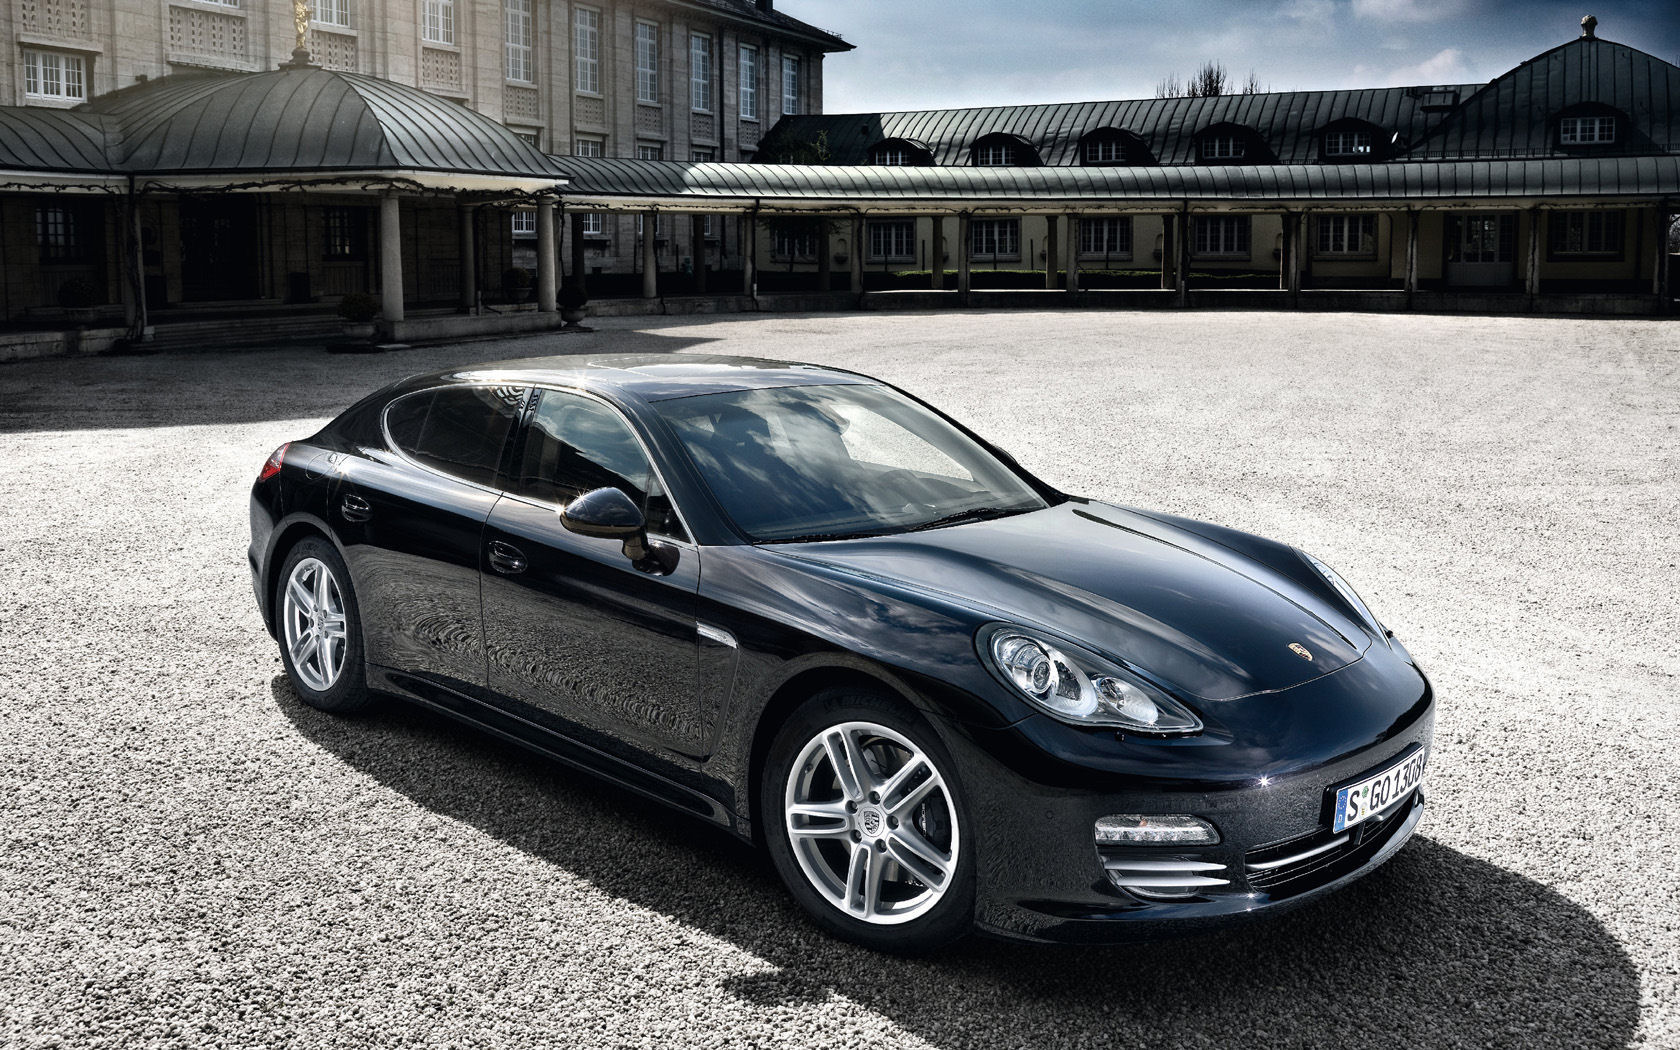 Porsche Porsche Panamera Porsche Panamera Desktop Wallpapers 1680x1050